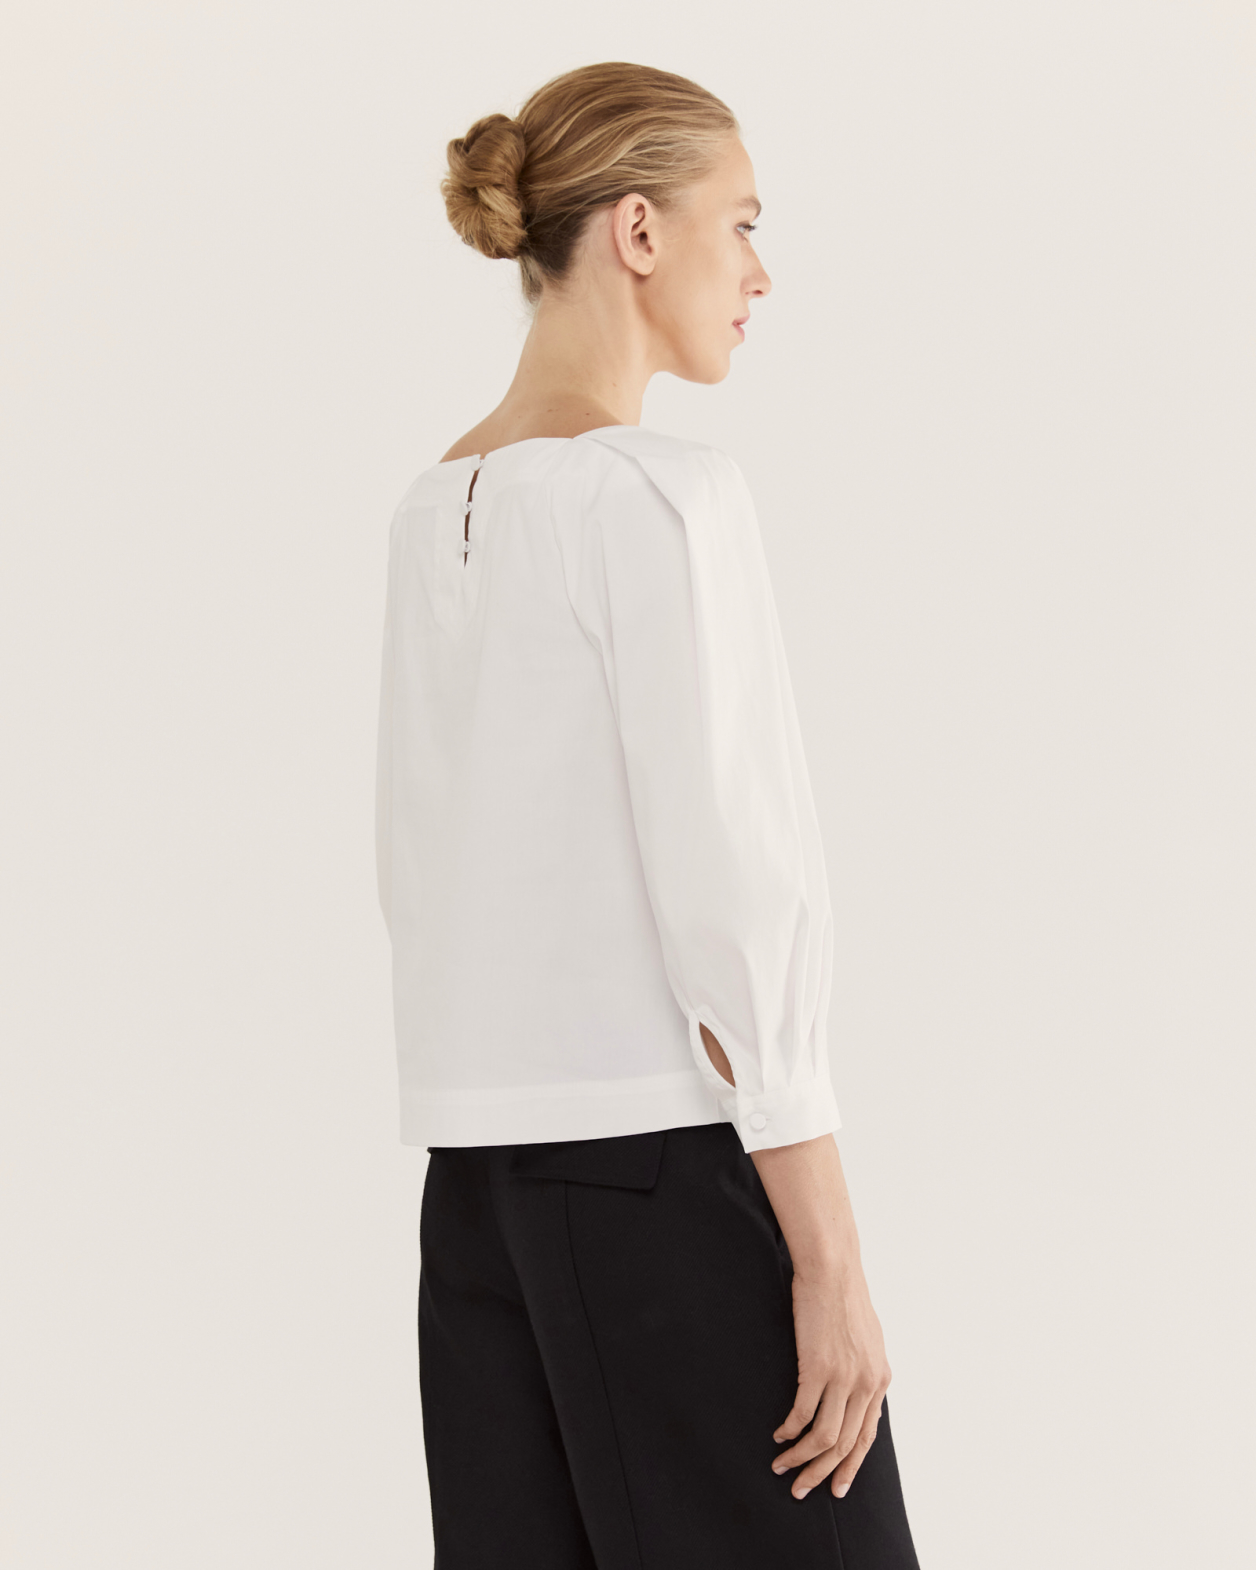 Piper Pleat Sleeve Top in WHITE